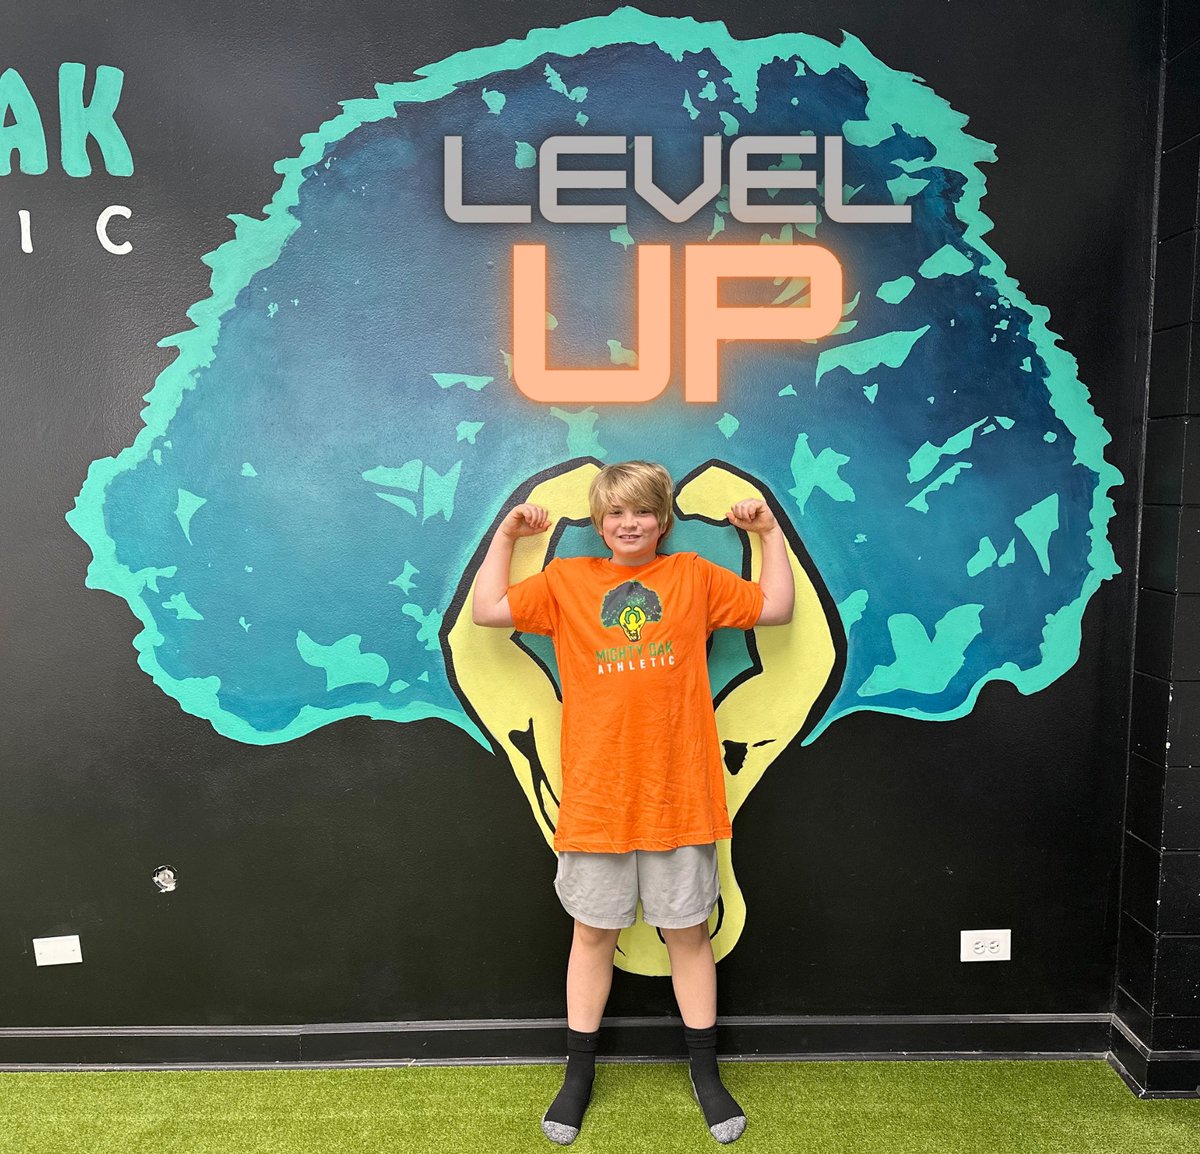 Congratulations to Quinn on reaching Level 3 - 🟠 in his strength training program! 🎉 His hard work is paying off with enhanced strength and speed on the ice, and he's also seeing a boost in confidence in the classroom. Keep pushing the limits, Quinn! #AthleteAchievement